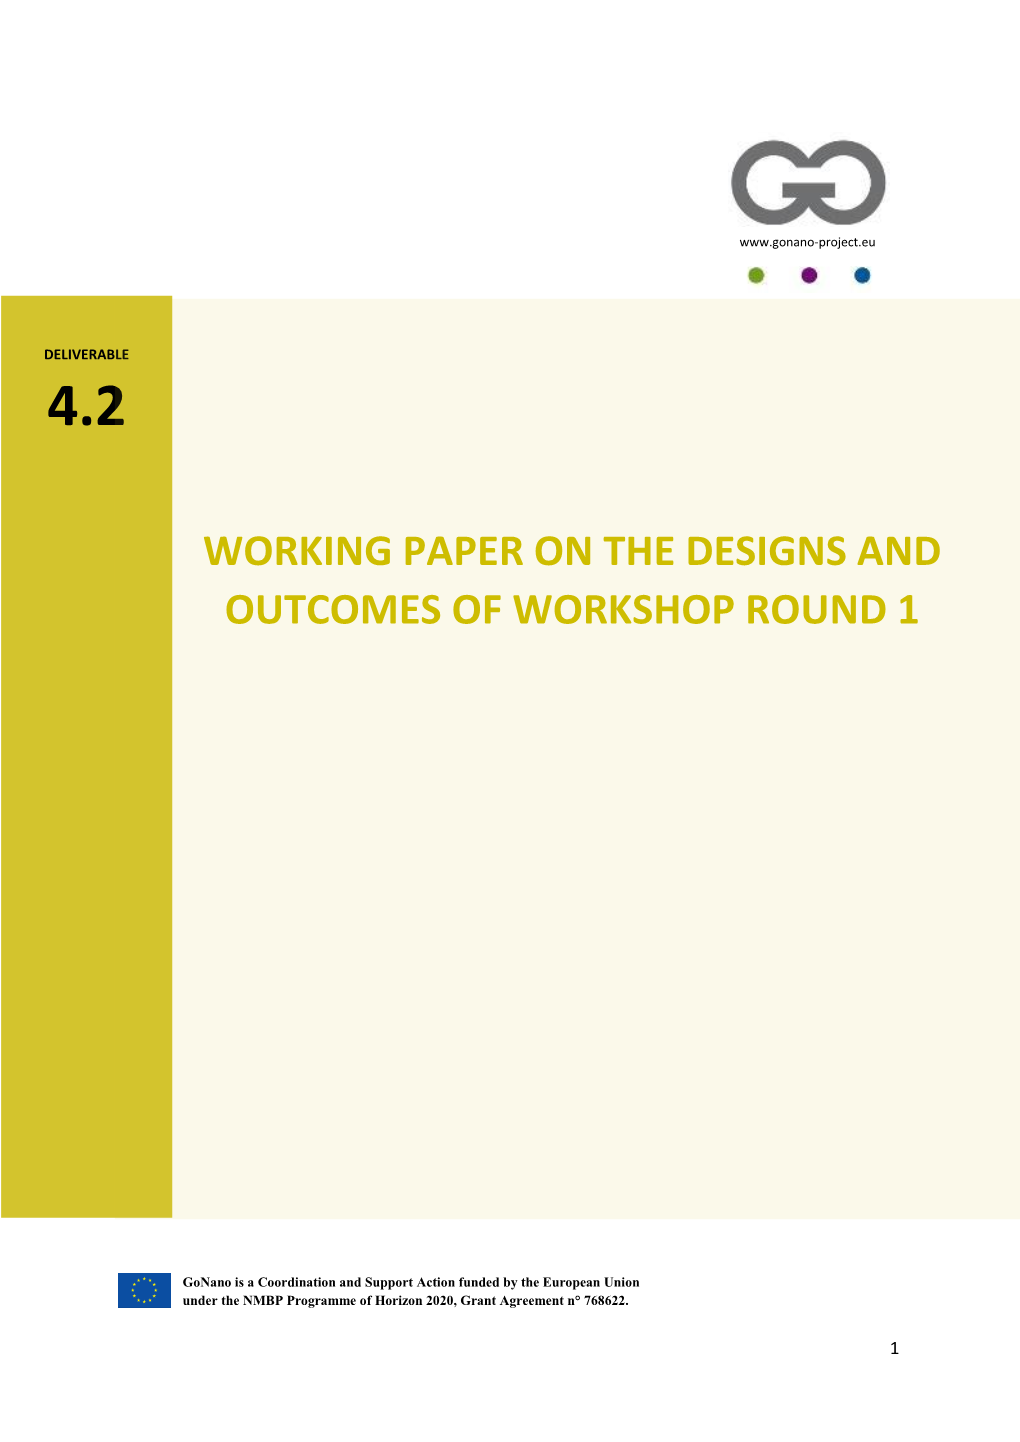 Working Paper on the Designs and Outcomes of the First